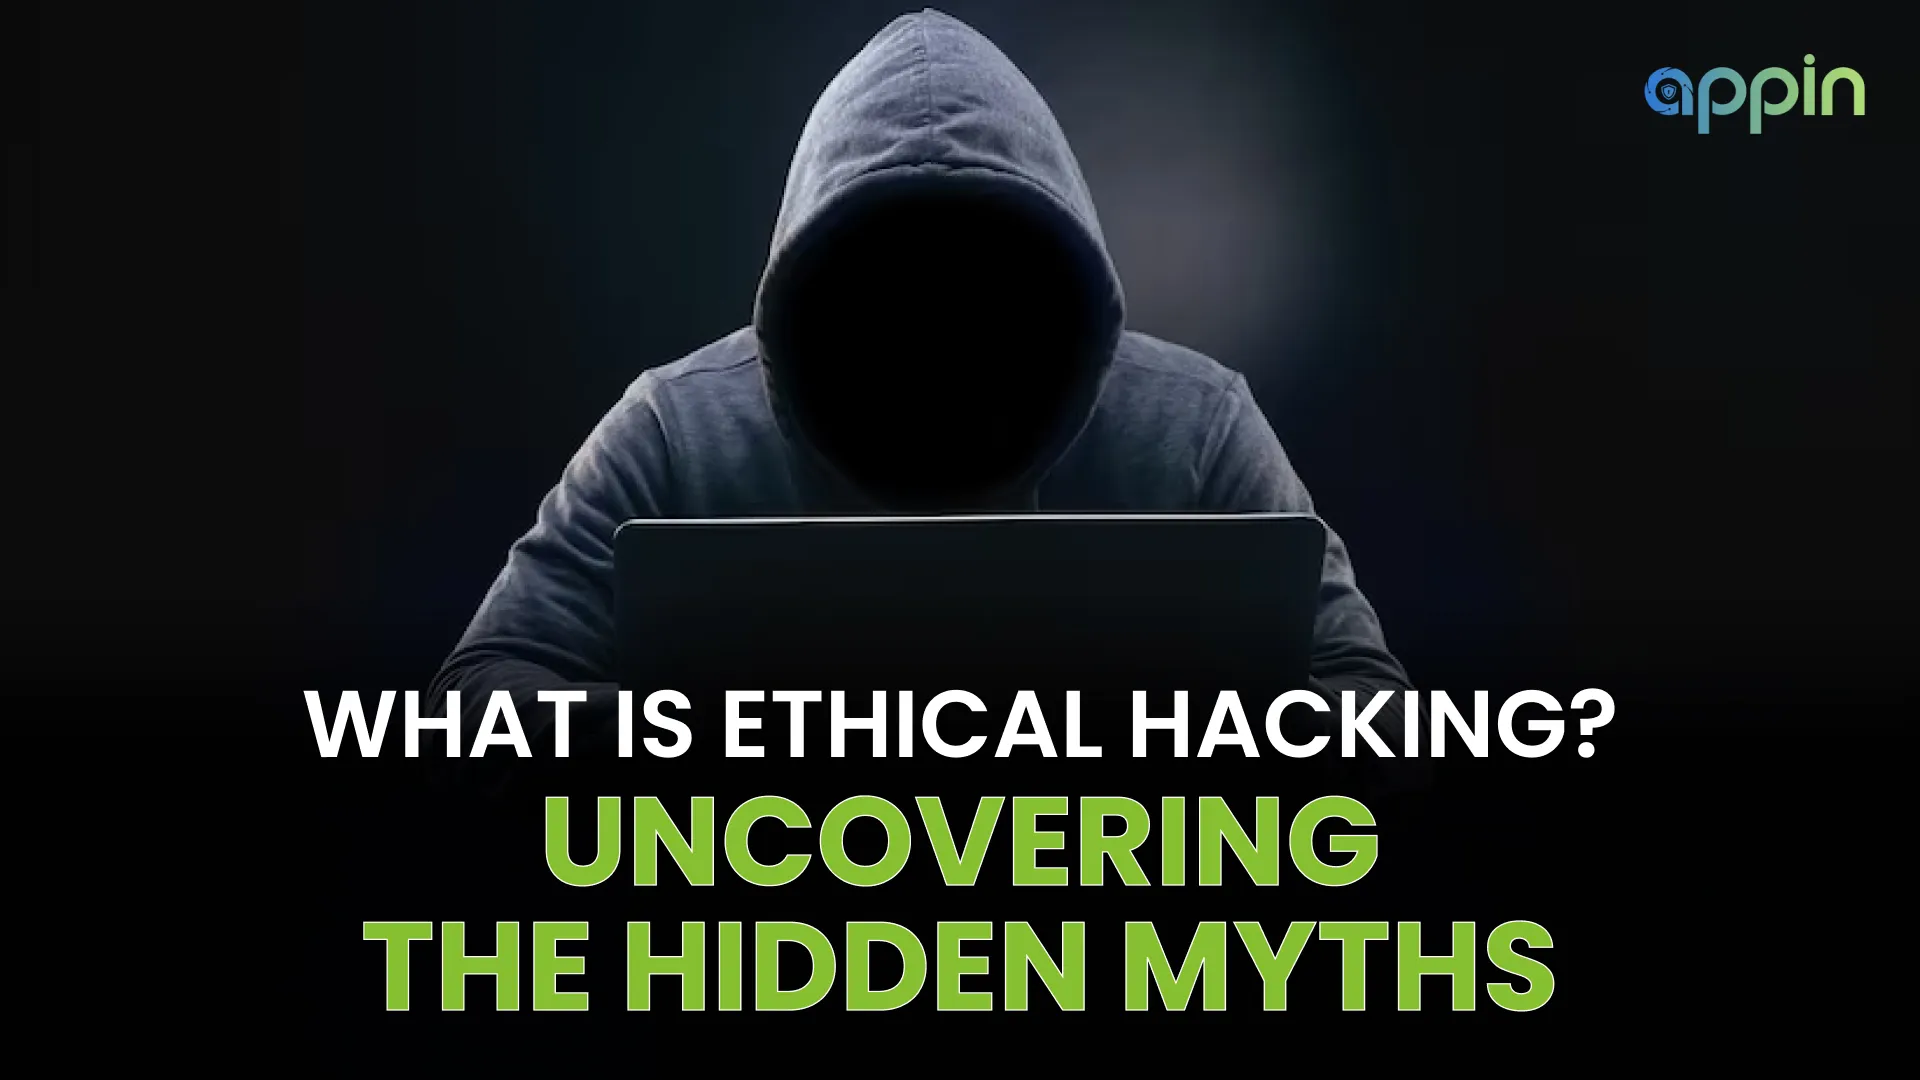 What is ethical hacking?